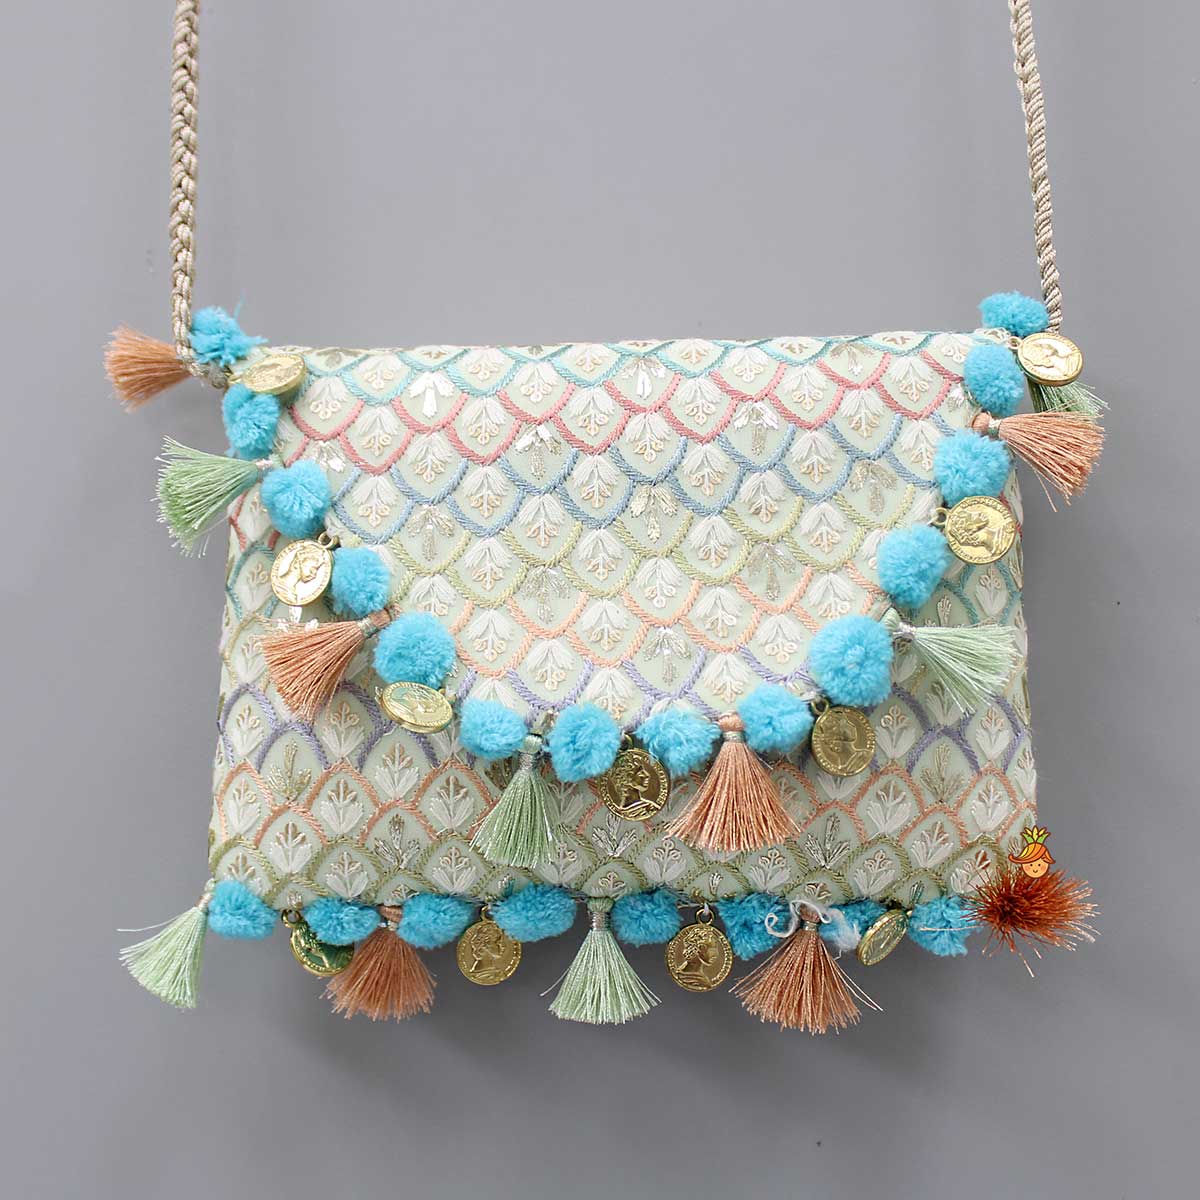 Beautiful Embroidered Sling Bag With Braided String